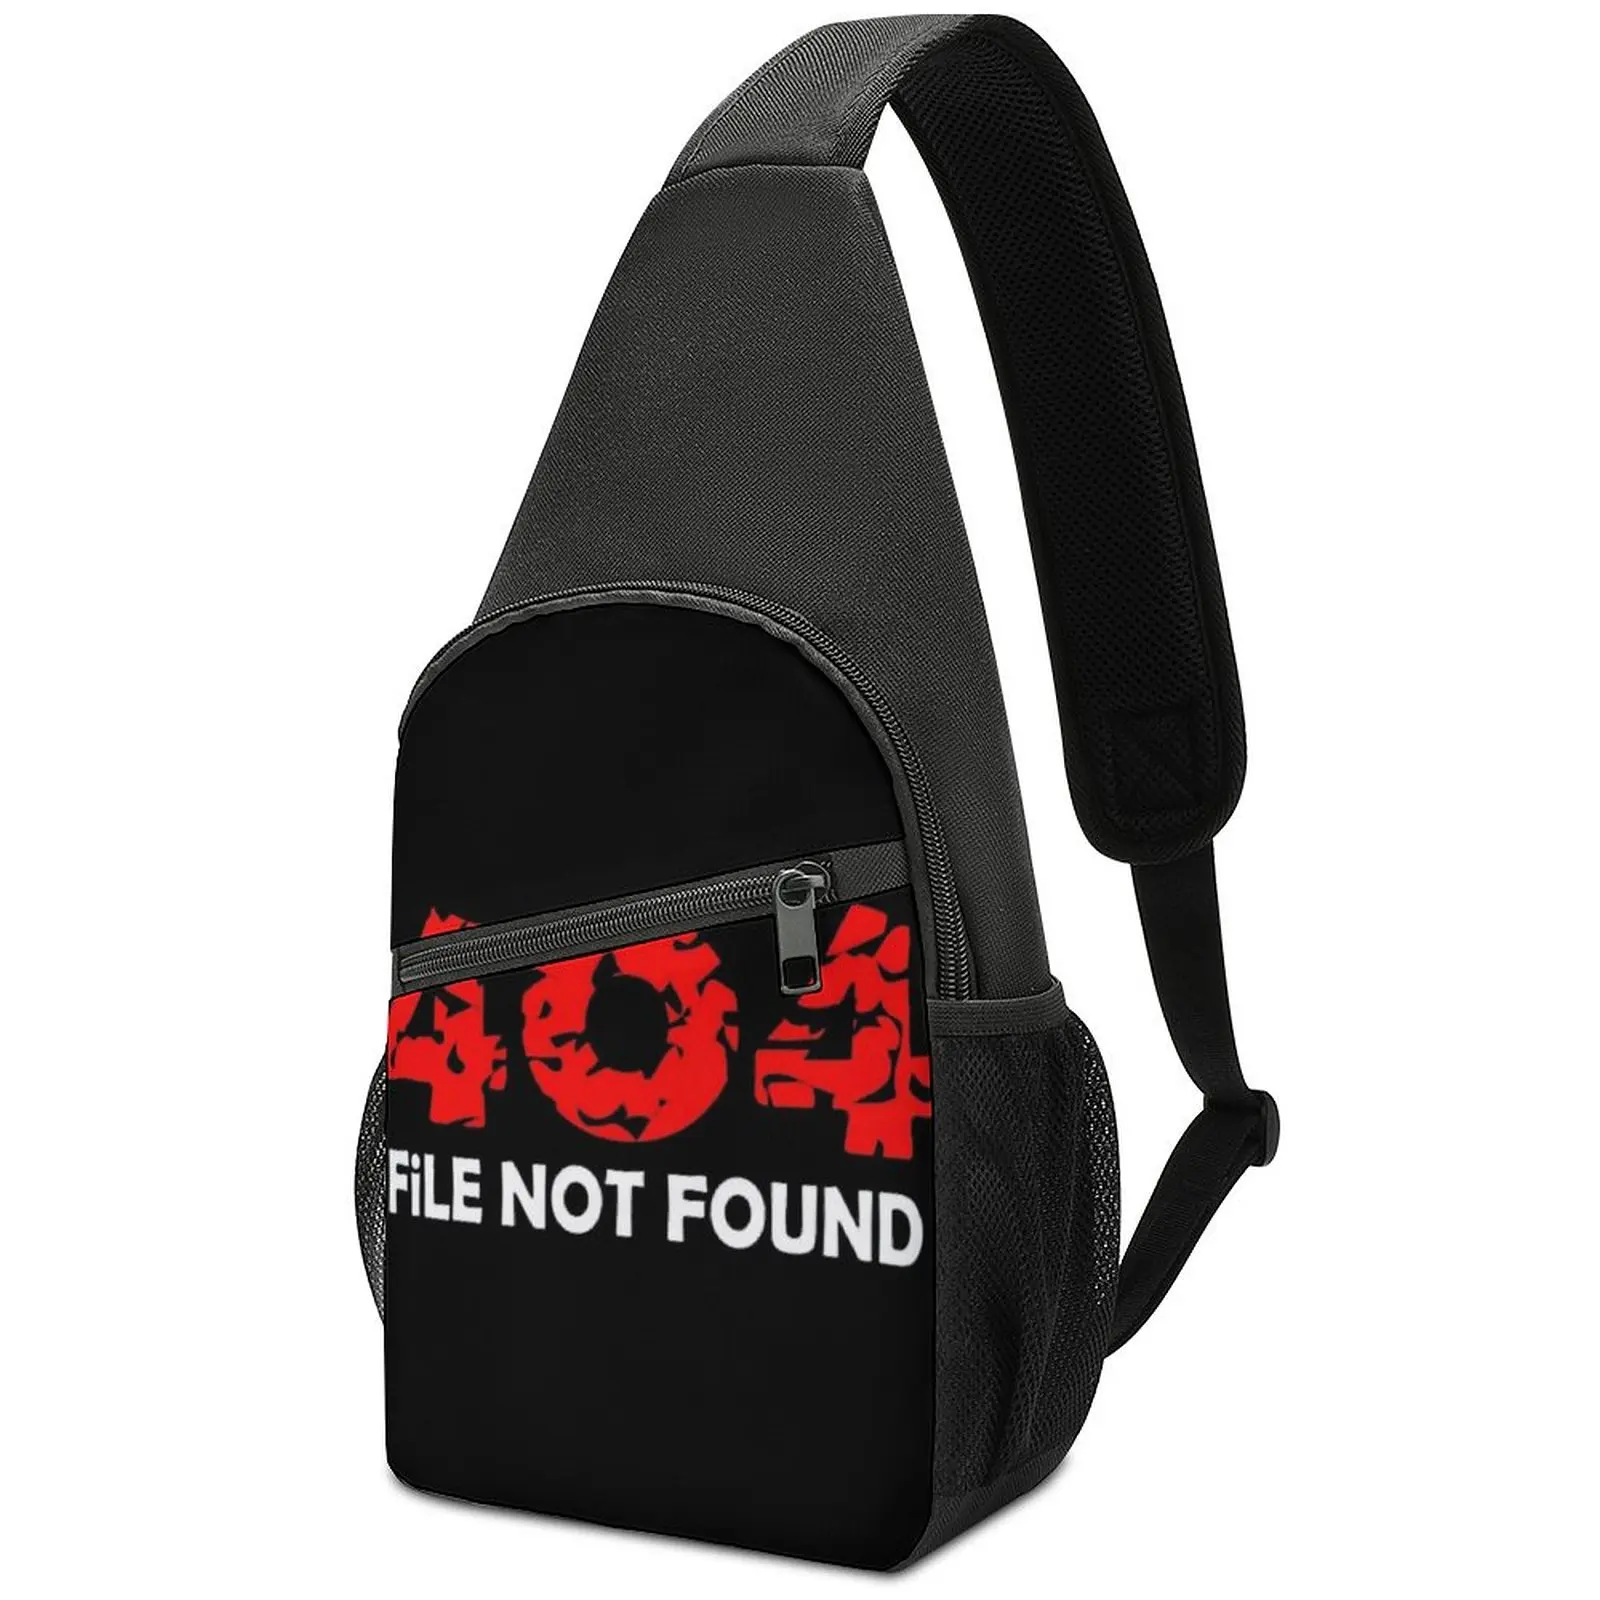 

Bad Notice Chest Bags Women Error 404 File Not Found Travel Shoulder Bag Casual Print Small Bag Business Outdoor Sling Bags